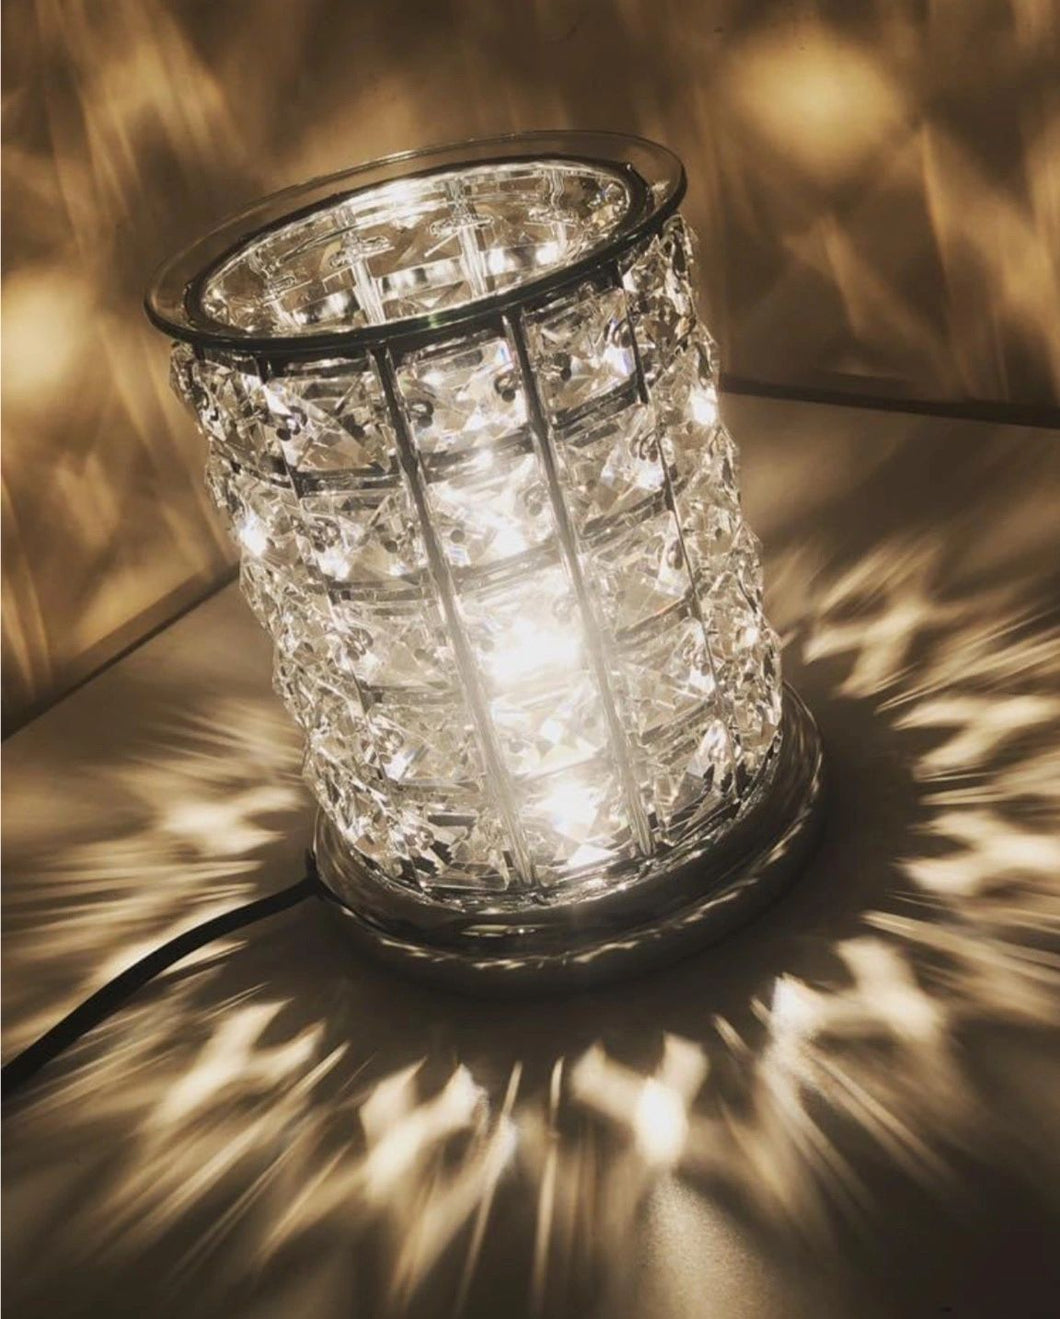 Clear Gem Crystal Aroma Lamp  Aroma Lamp With Gem Design Where The Light Reflects Around The Room Off The Gems.  Acts As An Oil Warmer With A Glass Dish On Top That Is Included. Touch Sensitive Turn On And Off By Simply Touching The Lamp. wax melts, sizzlers.